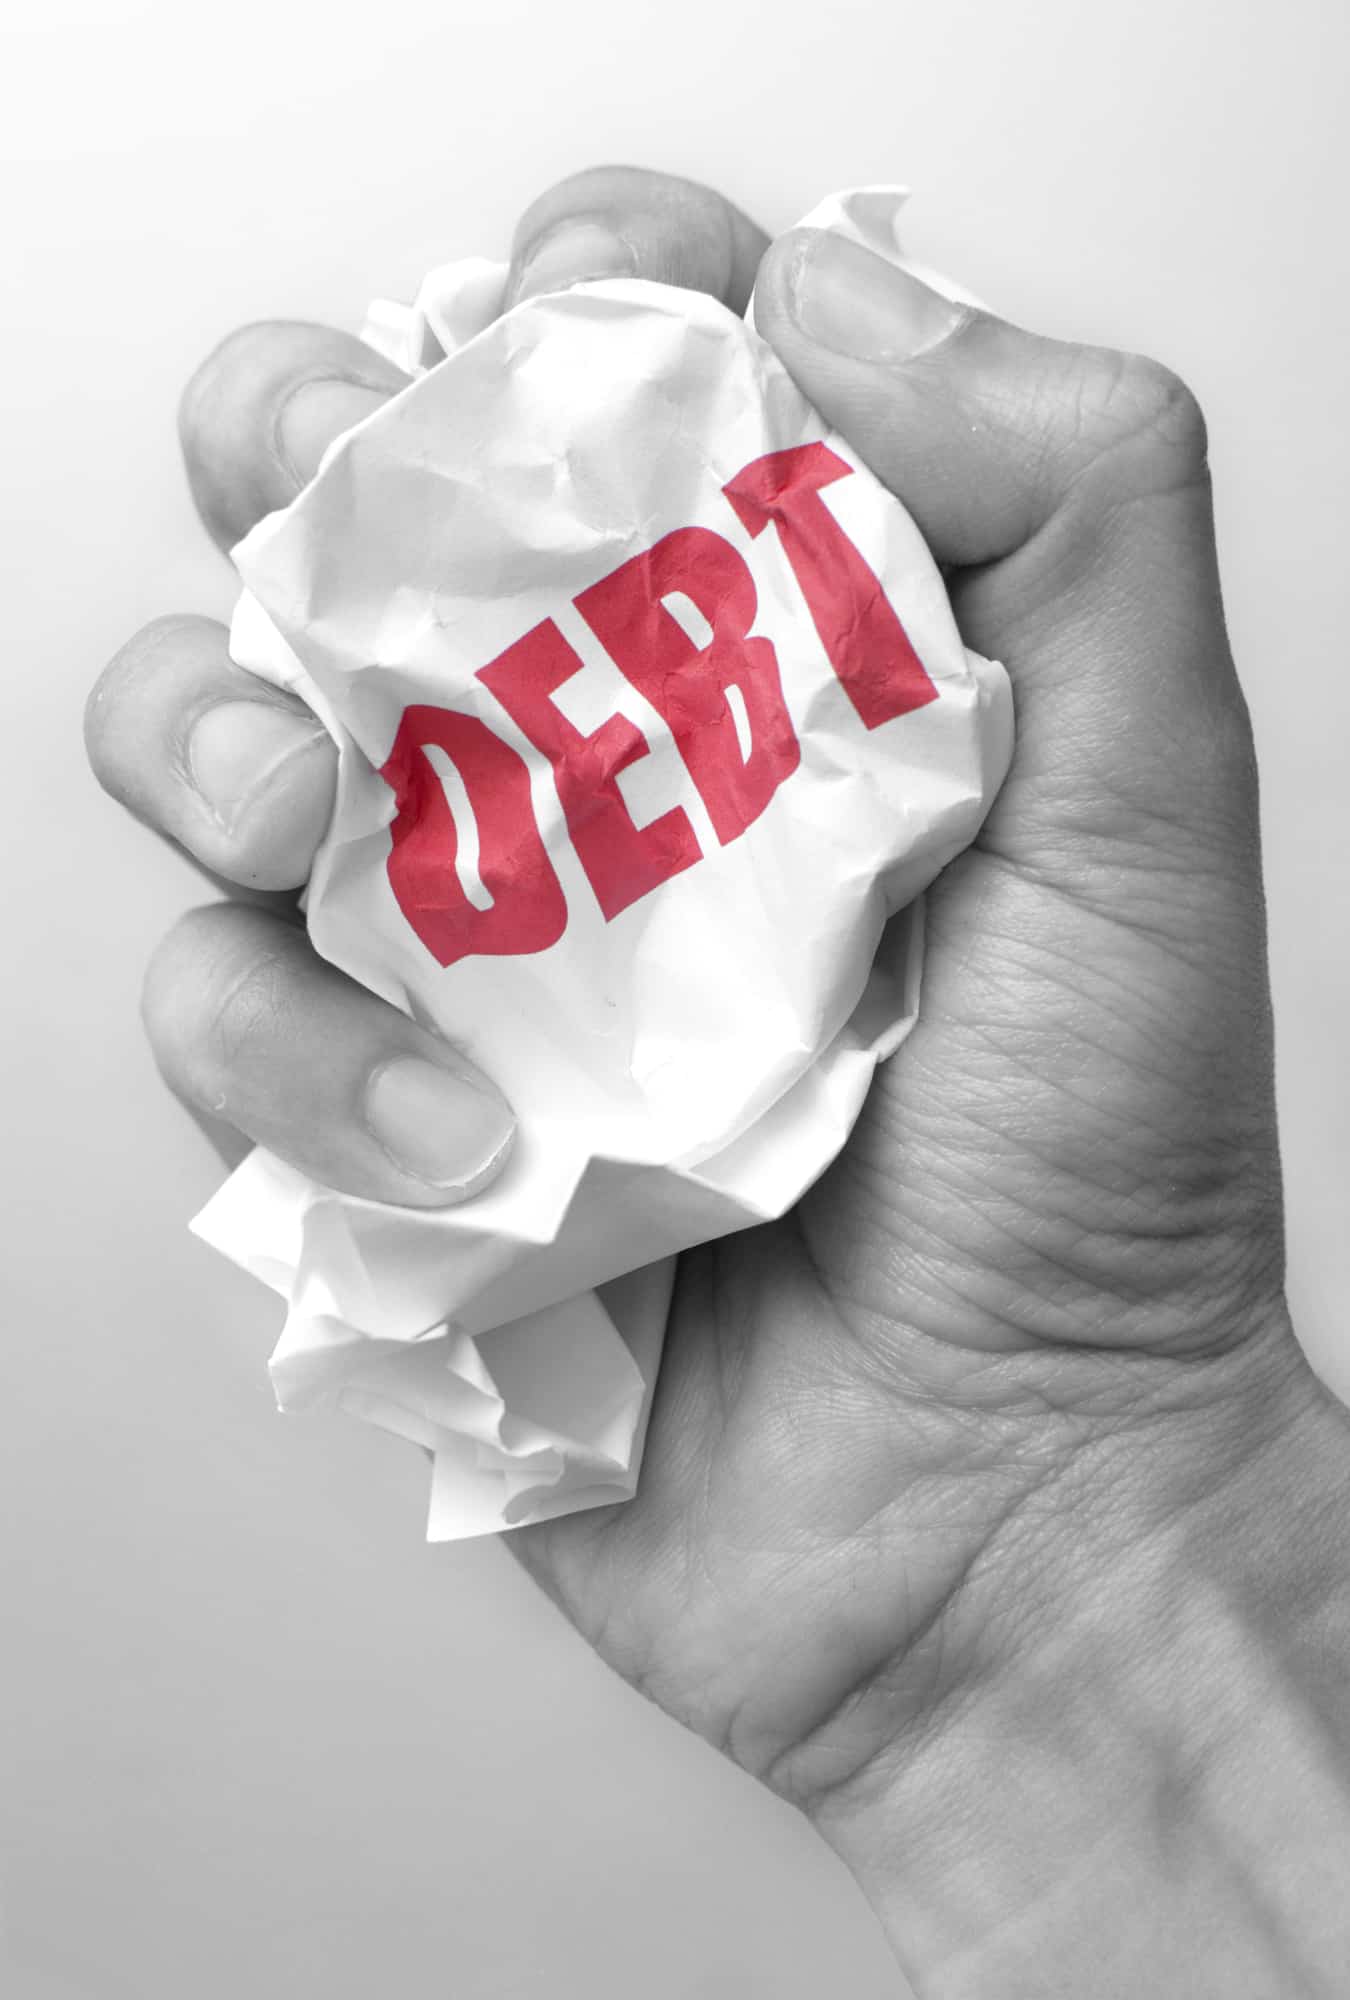 Reduce Unsecured Debt